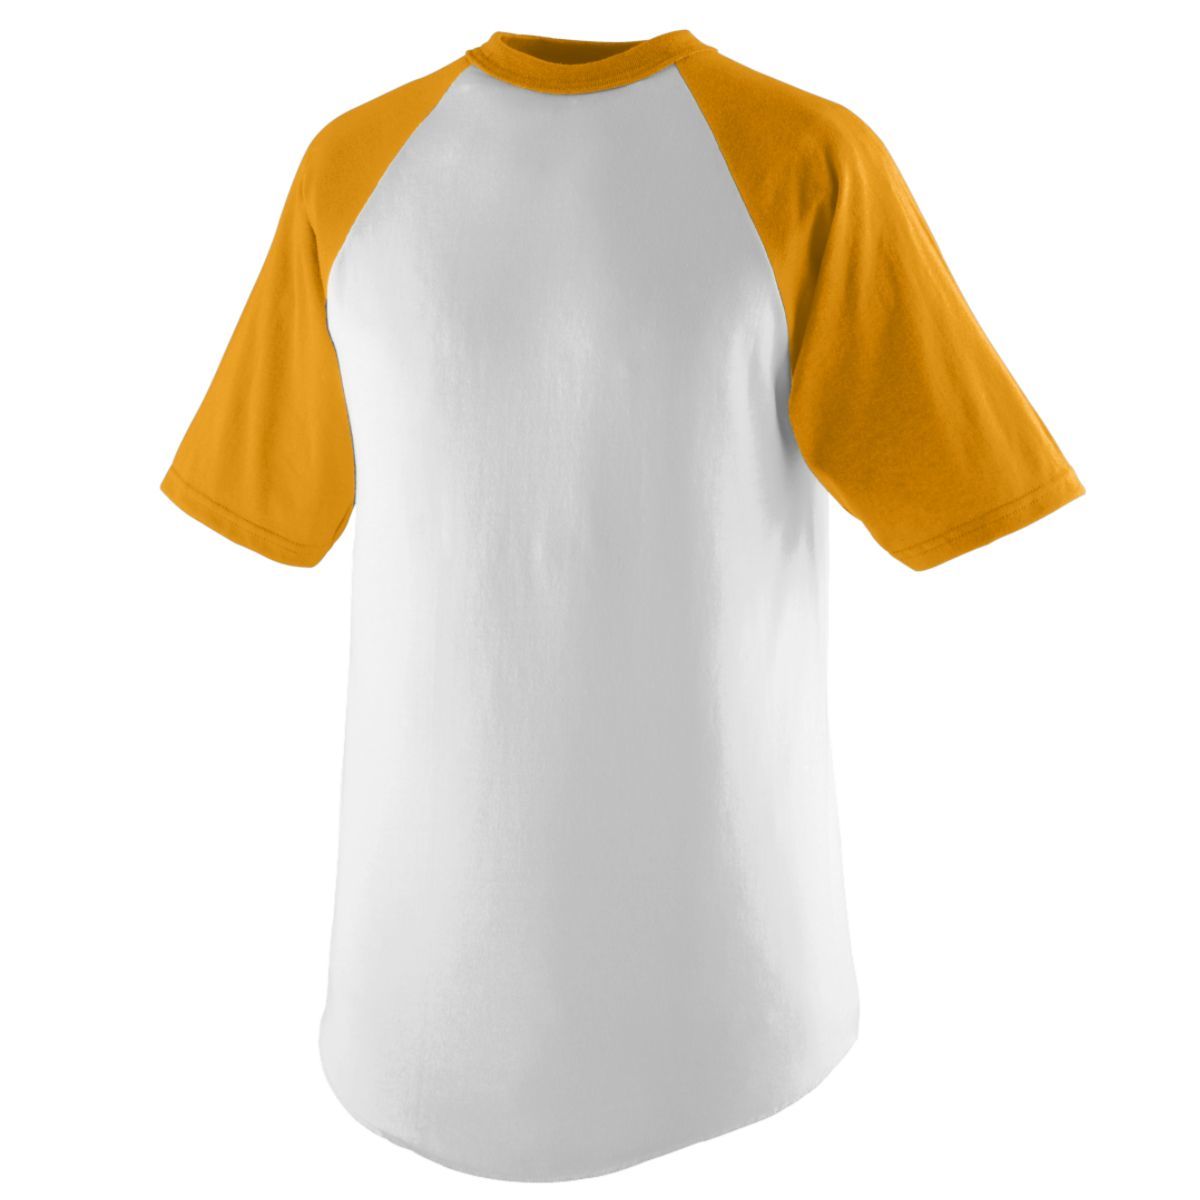 Augusta Sportswear Youth Short Sleeve Baseball Jersey in White/Gold  -Part of the Youth, Youth-Jersey, Augusta-Products, Baseball, Shirts, All-Sports, All-Sports-1 product lines at KanaleyCreations.com